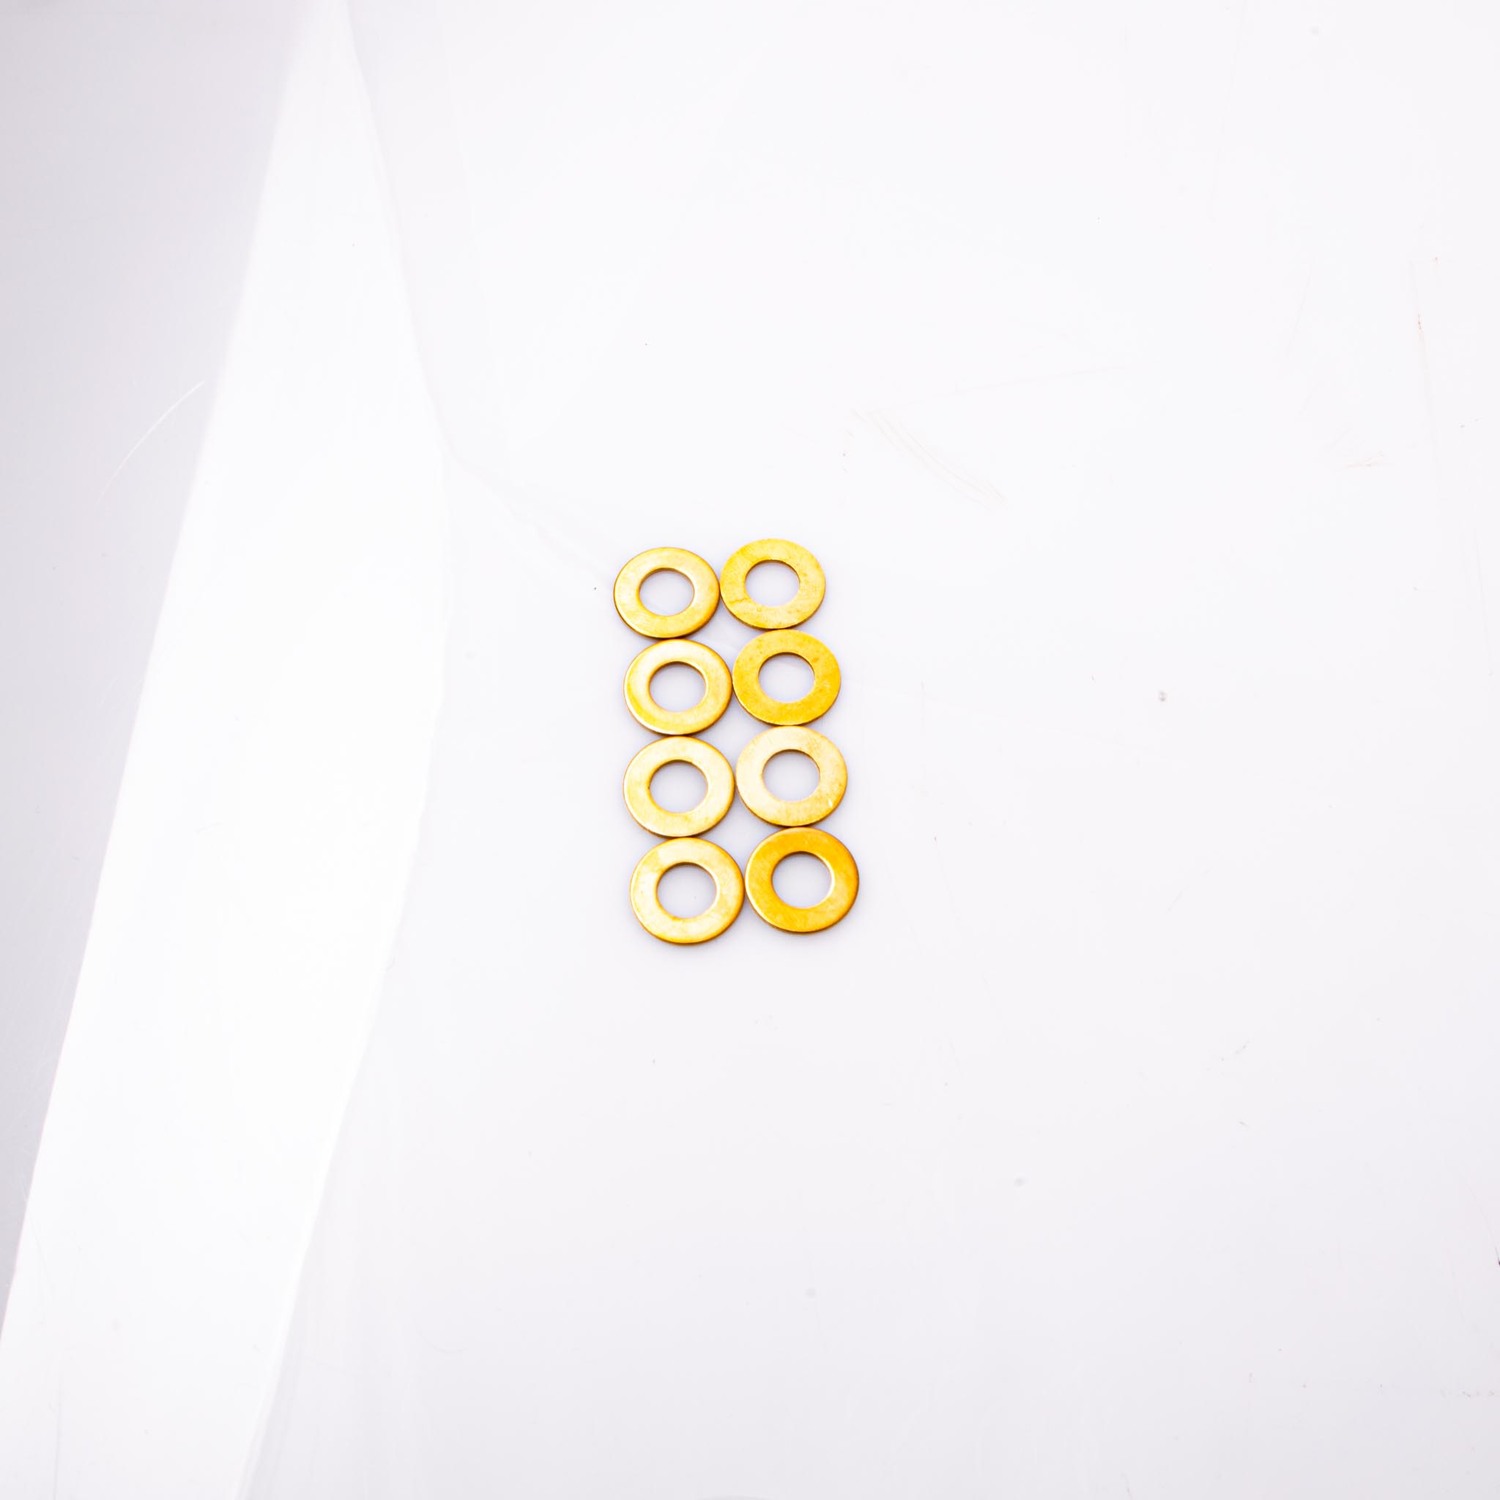 WASHER 5/16 FLAT     BRASS                PACK OF 10